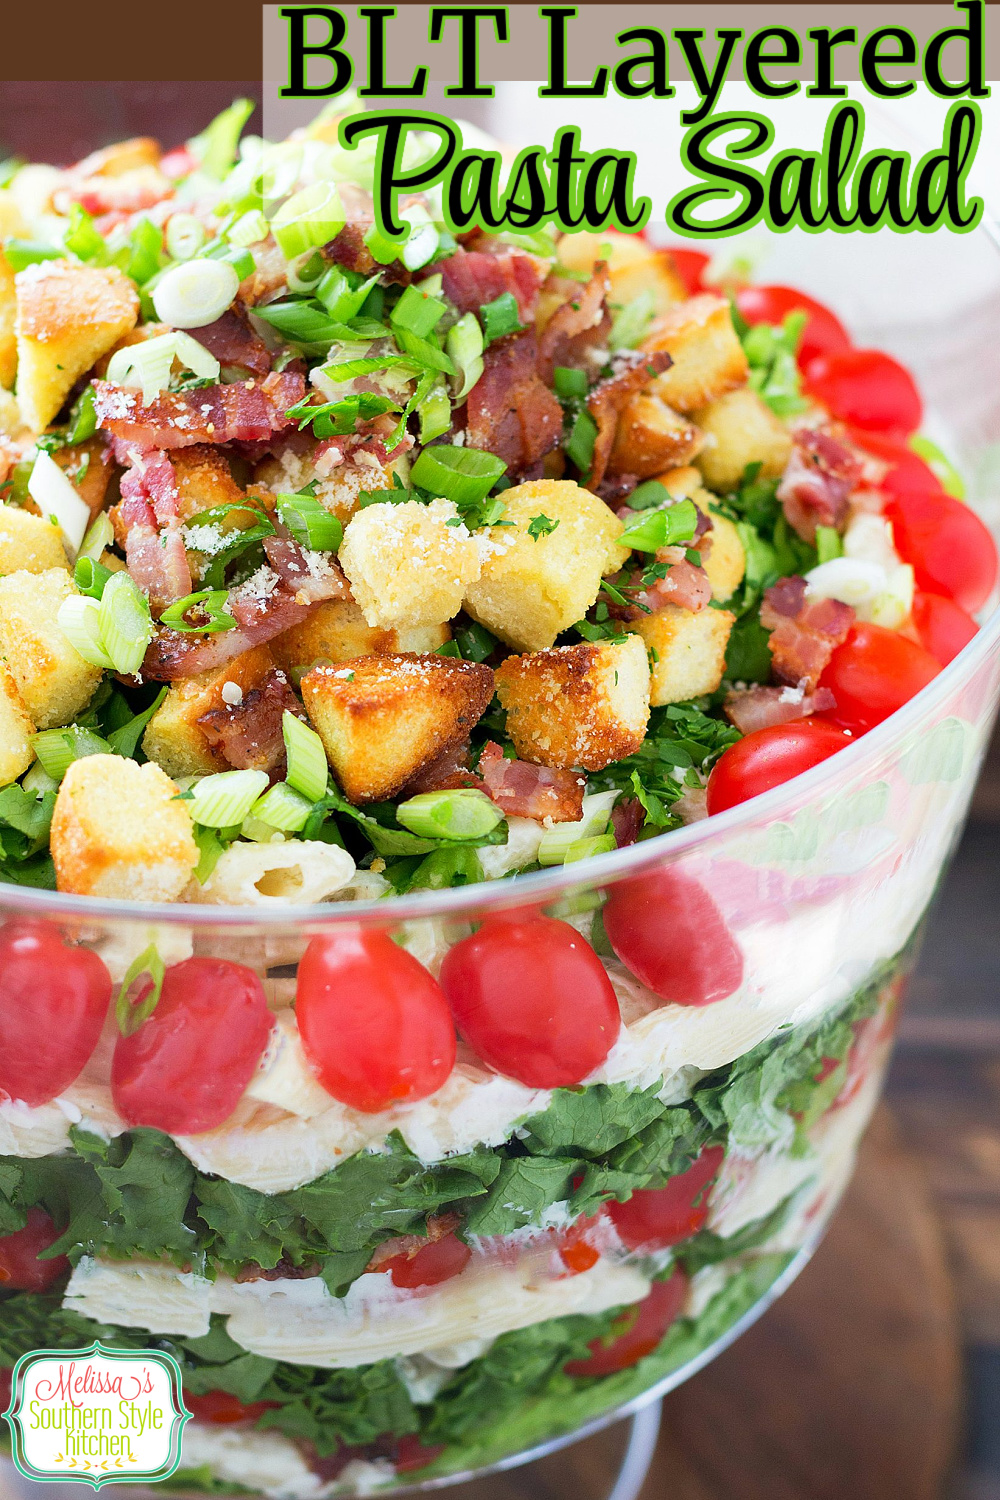 This BLT Layered Pasta Salad is an edible centerpiece that will make the perfect addition to your table #pastasalad #layeredsalad #BLT #BLTpastasalad #pastasaladrecipes #penne #bacon #salads #saladrecipes #pasta #dinnerideas #dinner #southernfood #southernrecipes via @melissasssk